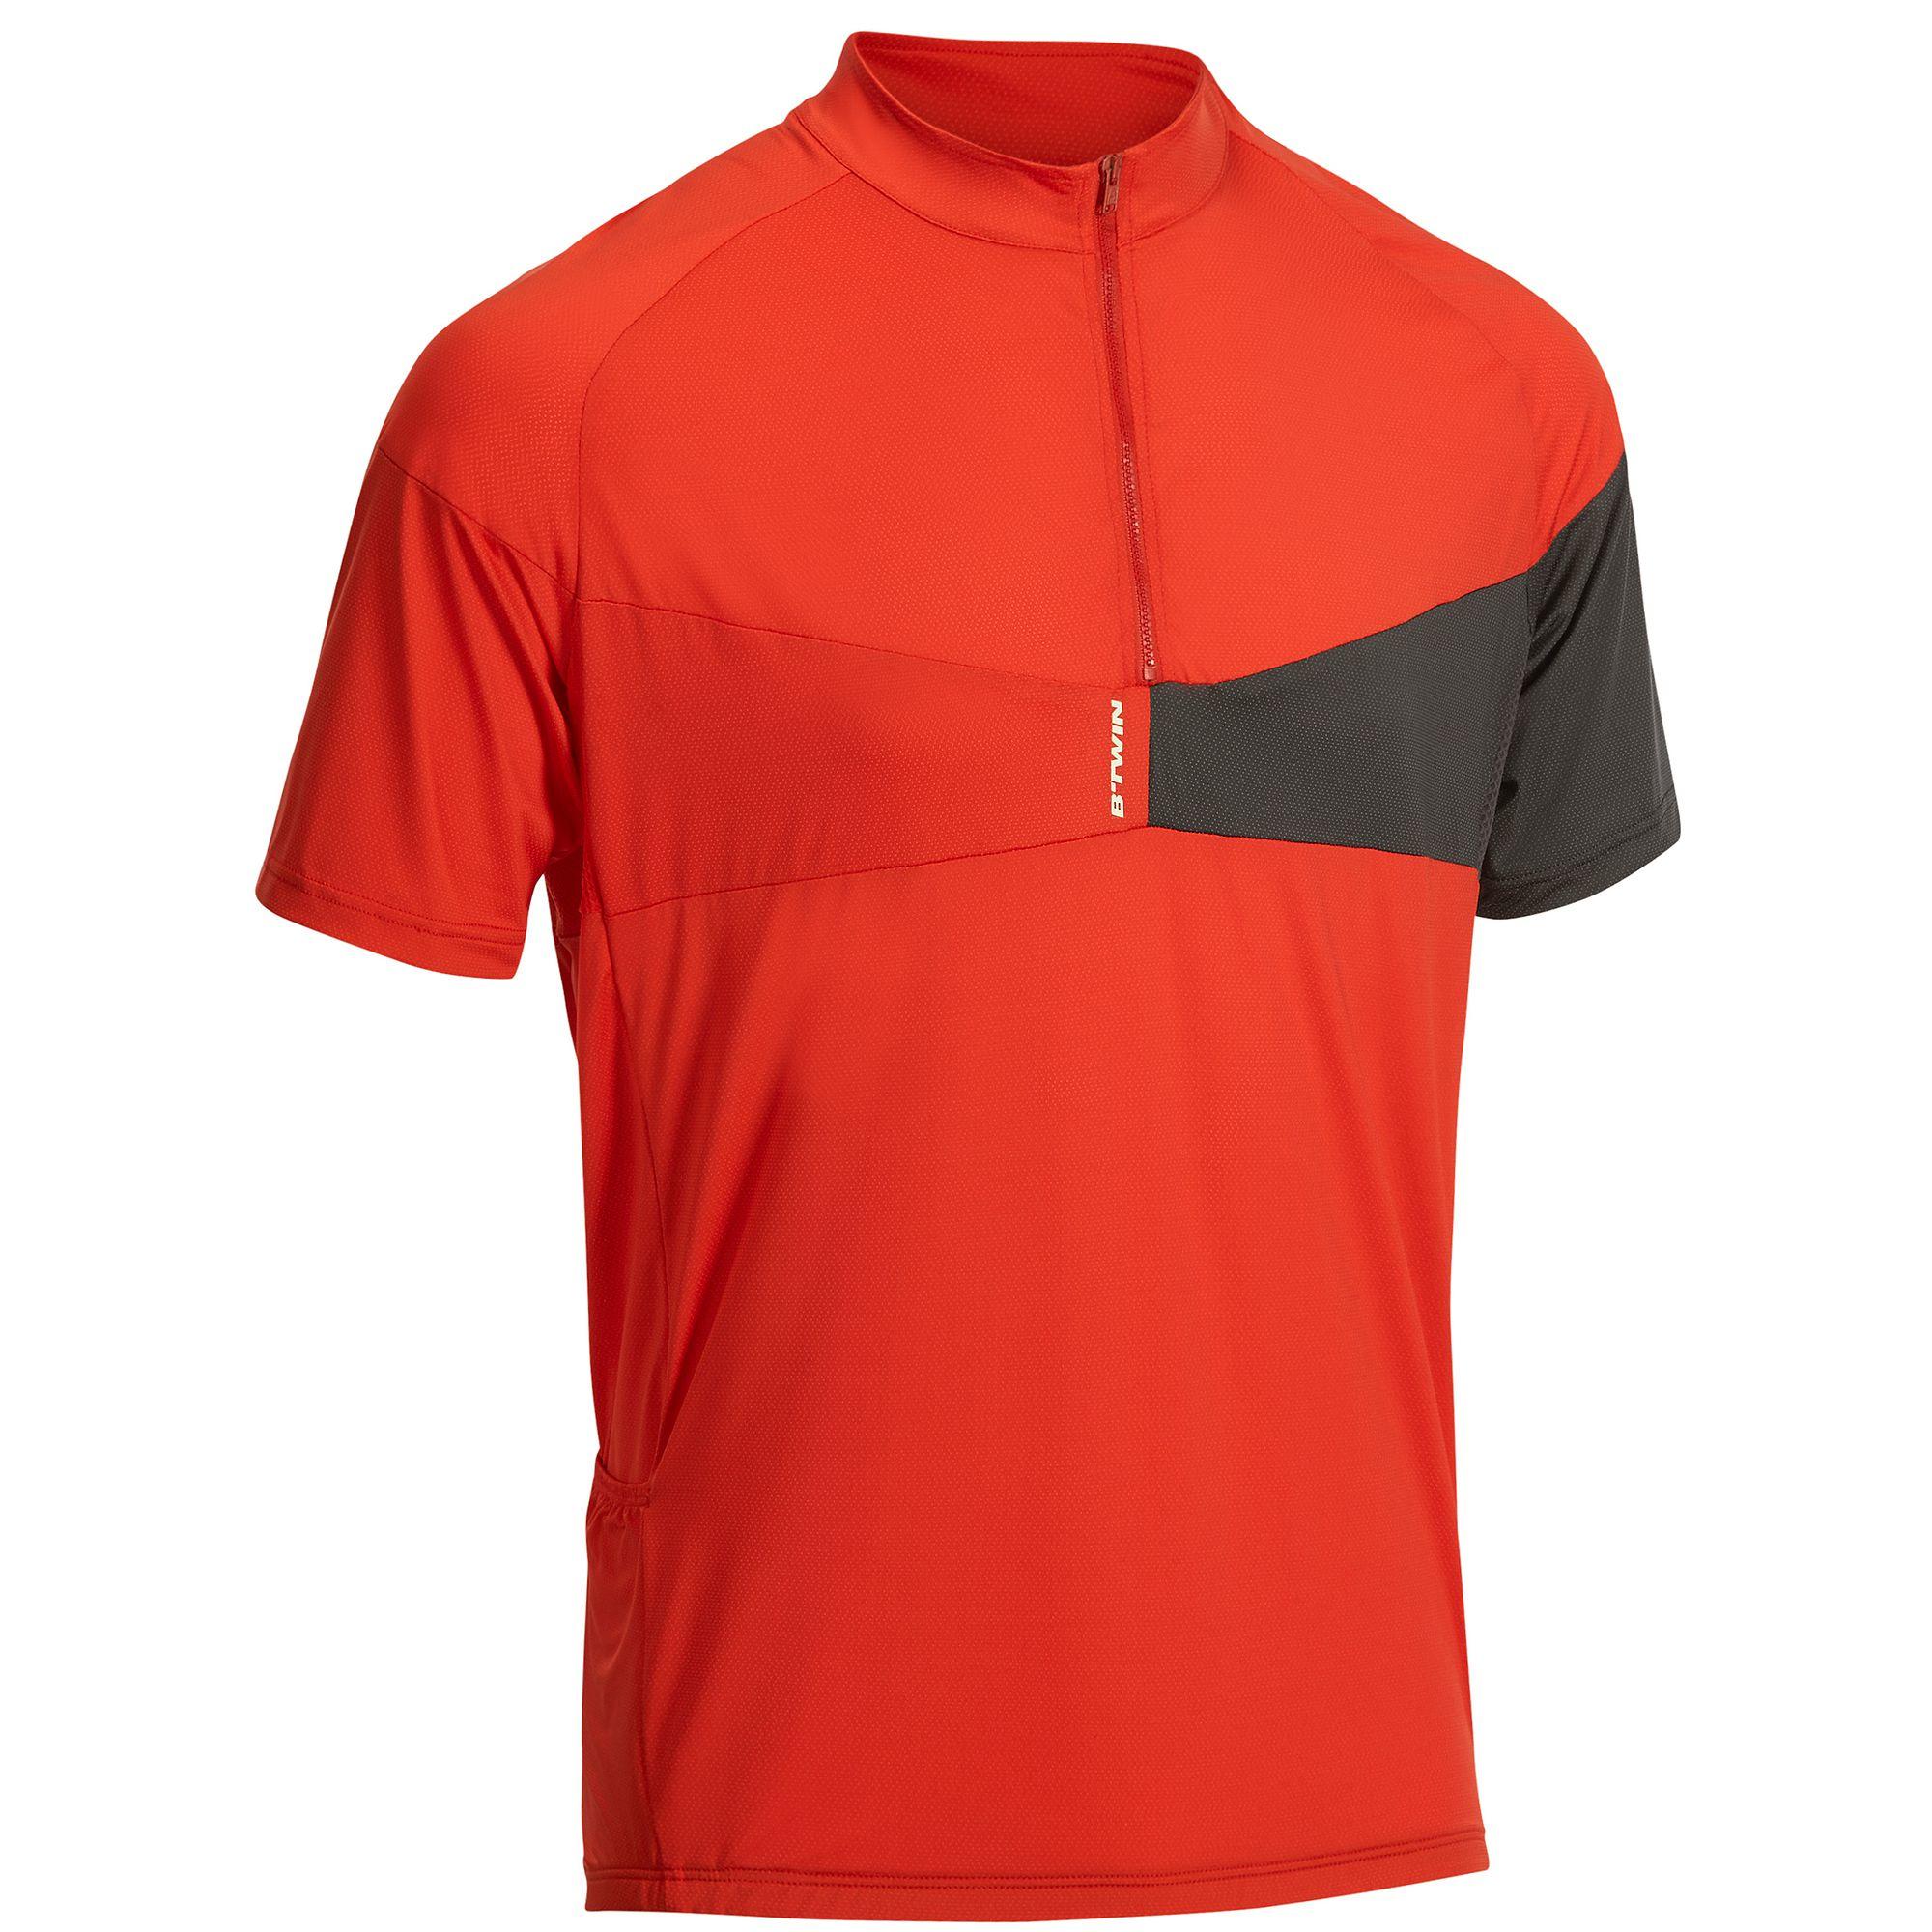 BTWIN 500 Short Sleeve Cycling Jersey -Red/Grey